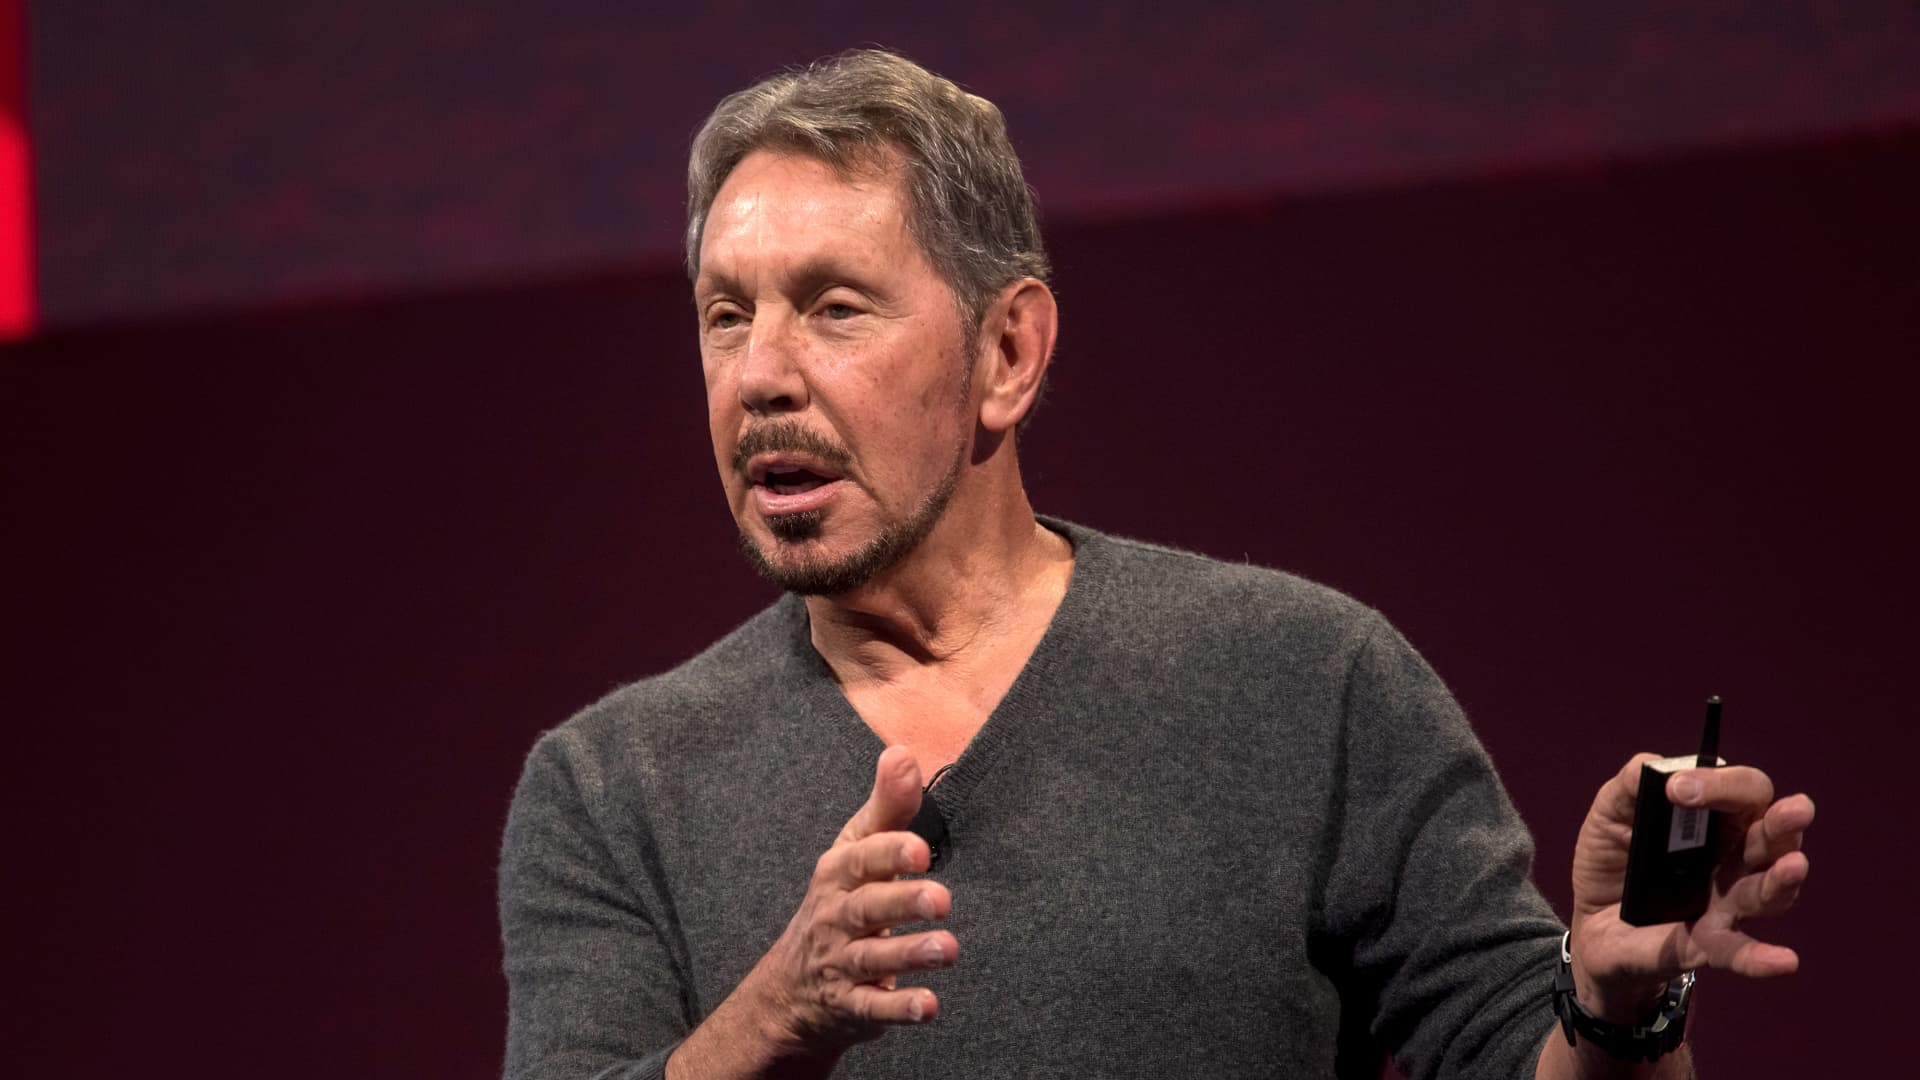 Larry Ellison, co-founder and chairman of Oracle Corp., speaks during the Oracle OpenWorld 2017 conference in San Francisco, California, U.S., on Tuesday, Oct. 3, 2017.